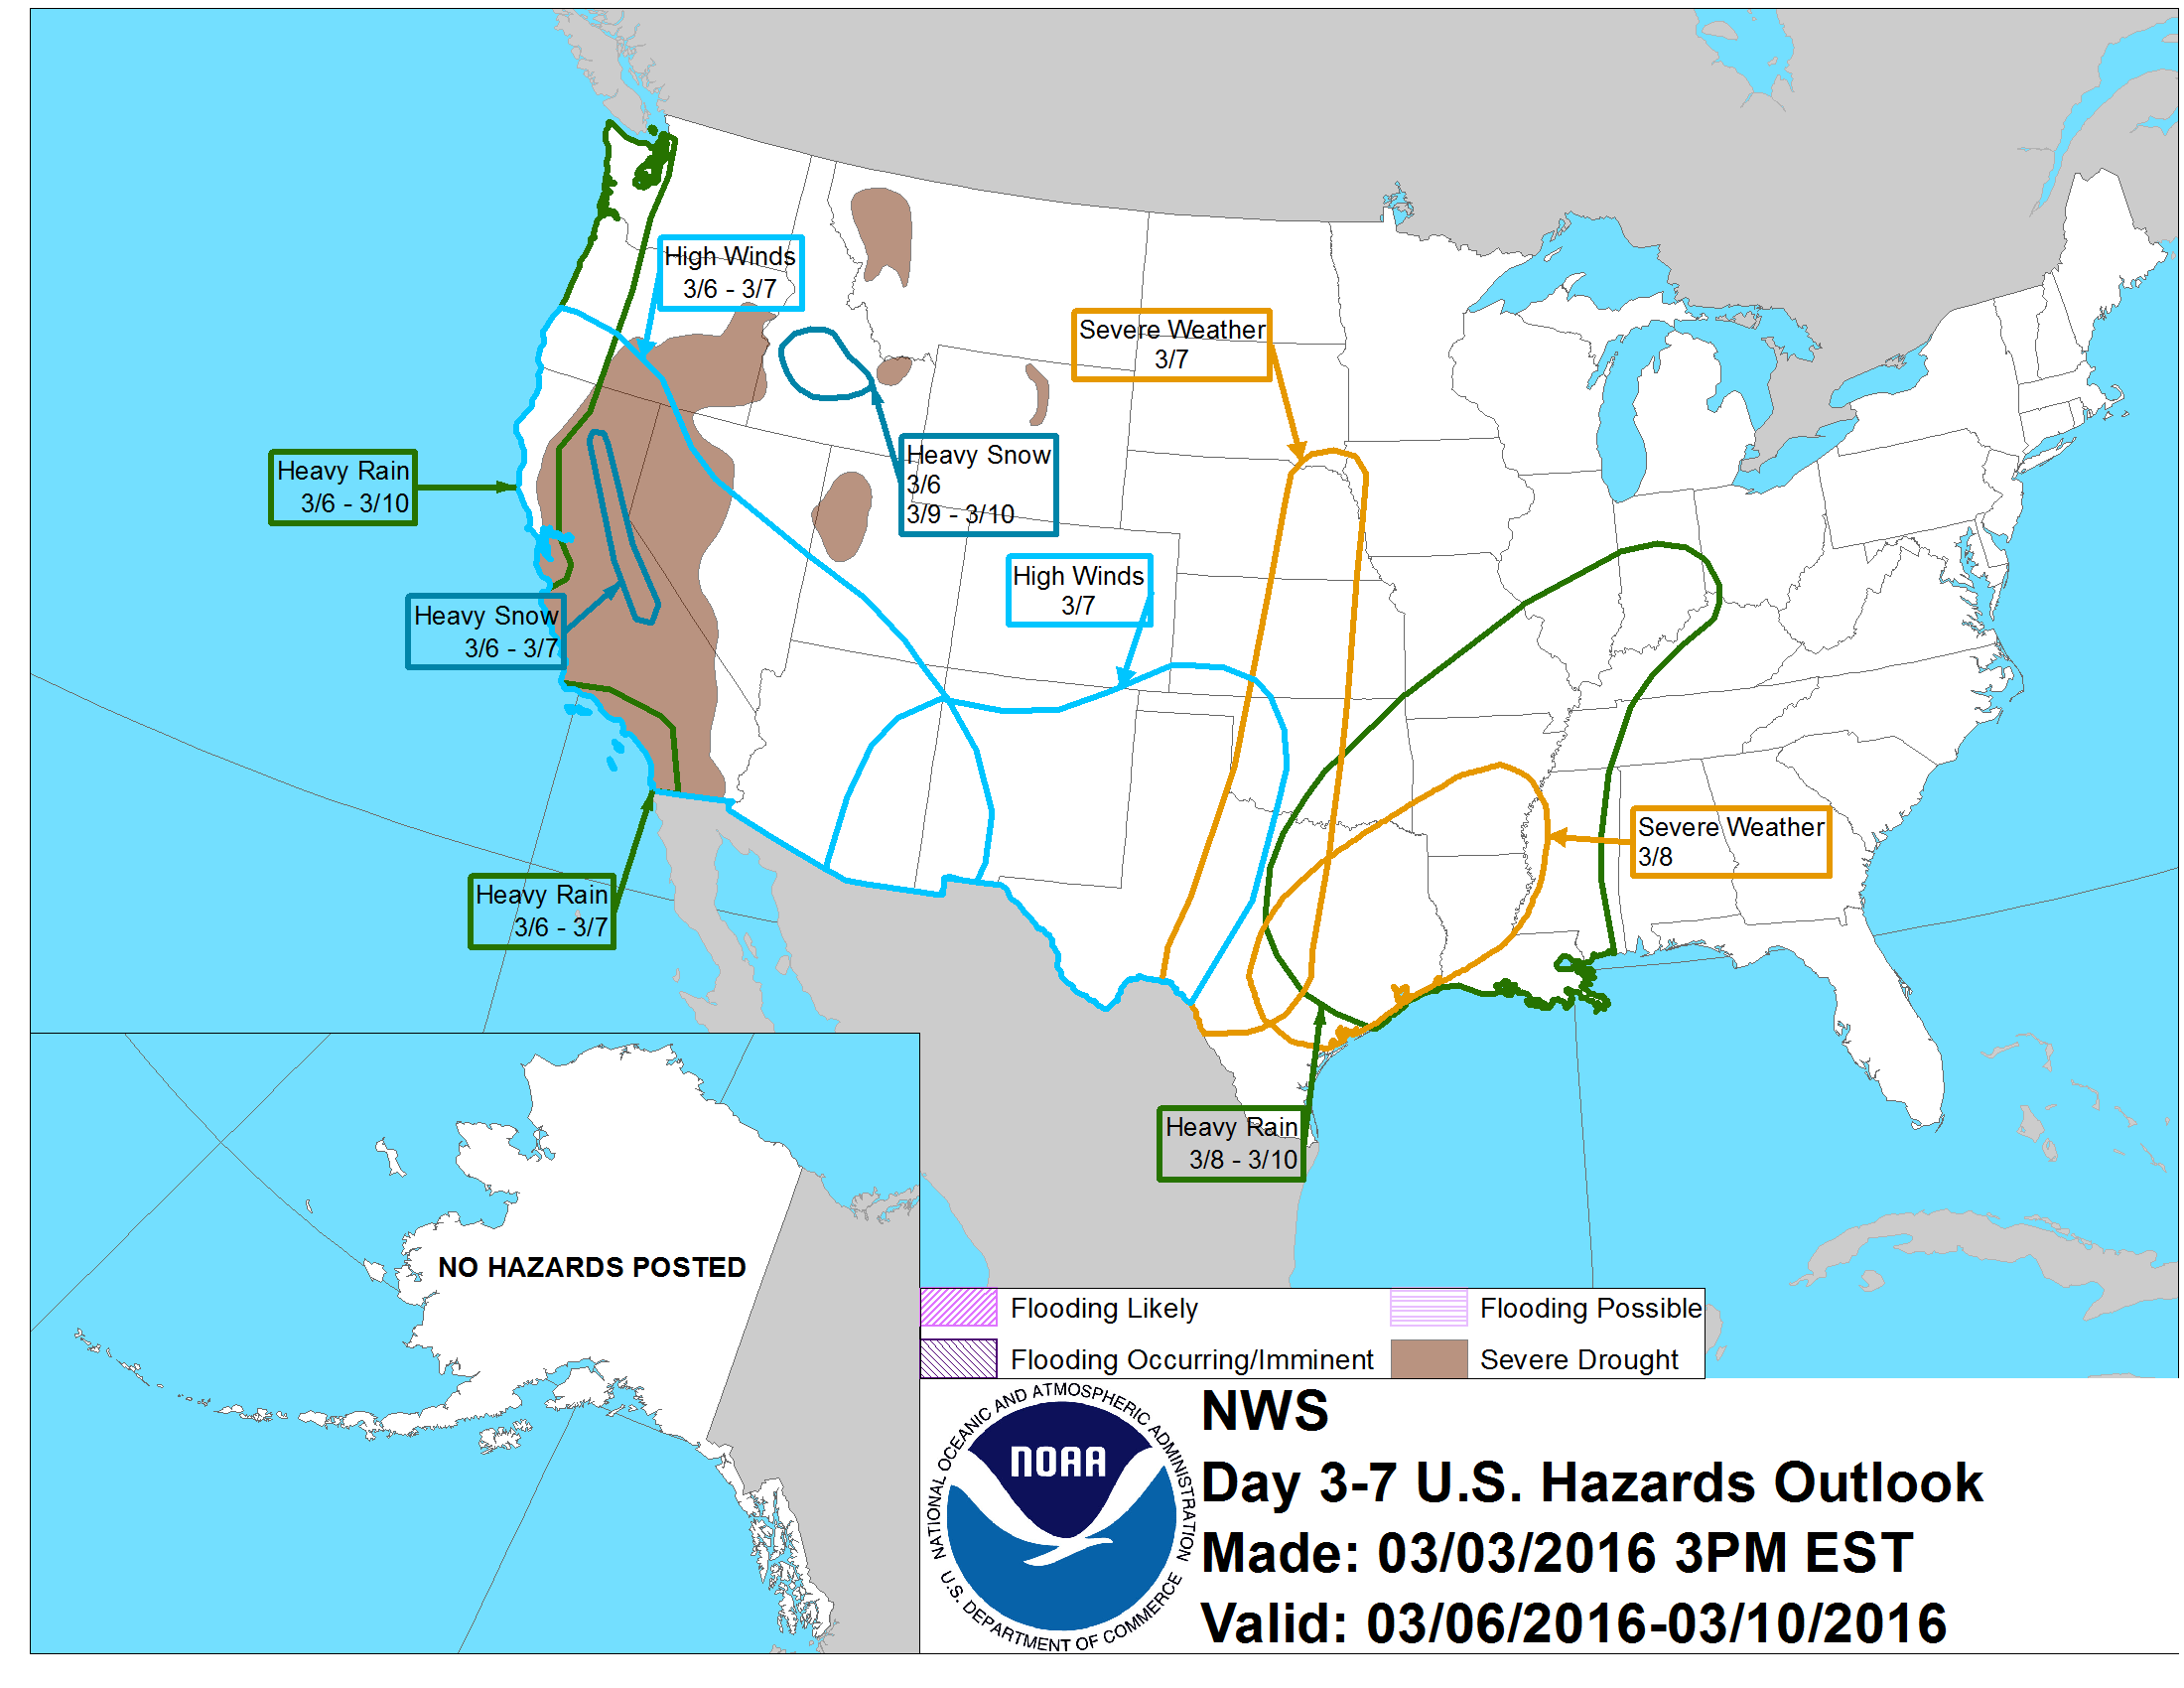 NOAA is forecasting "Heavy Snow" for California March 6-7th.  image:  noaa, today